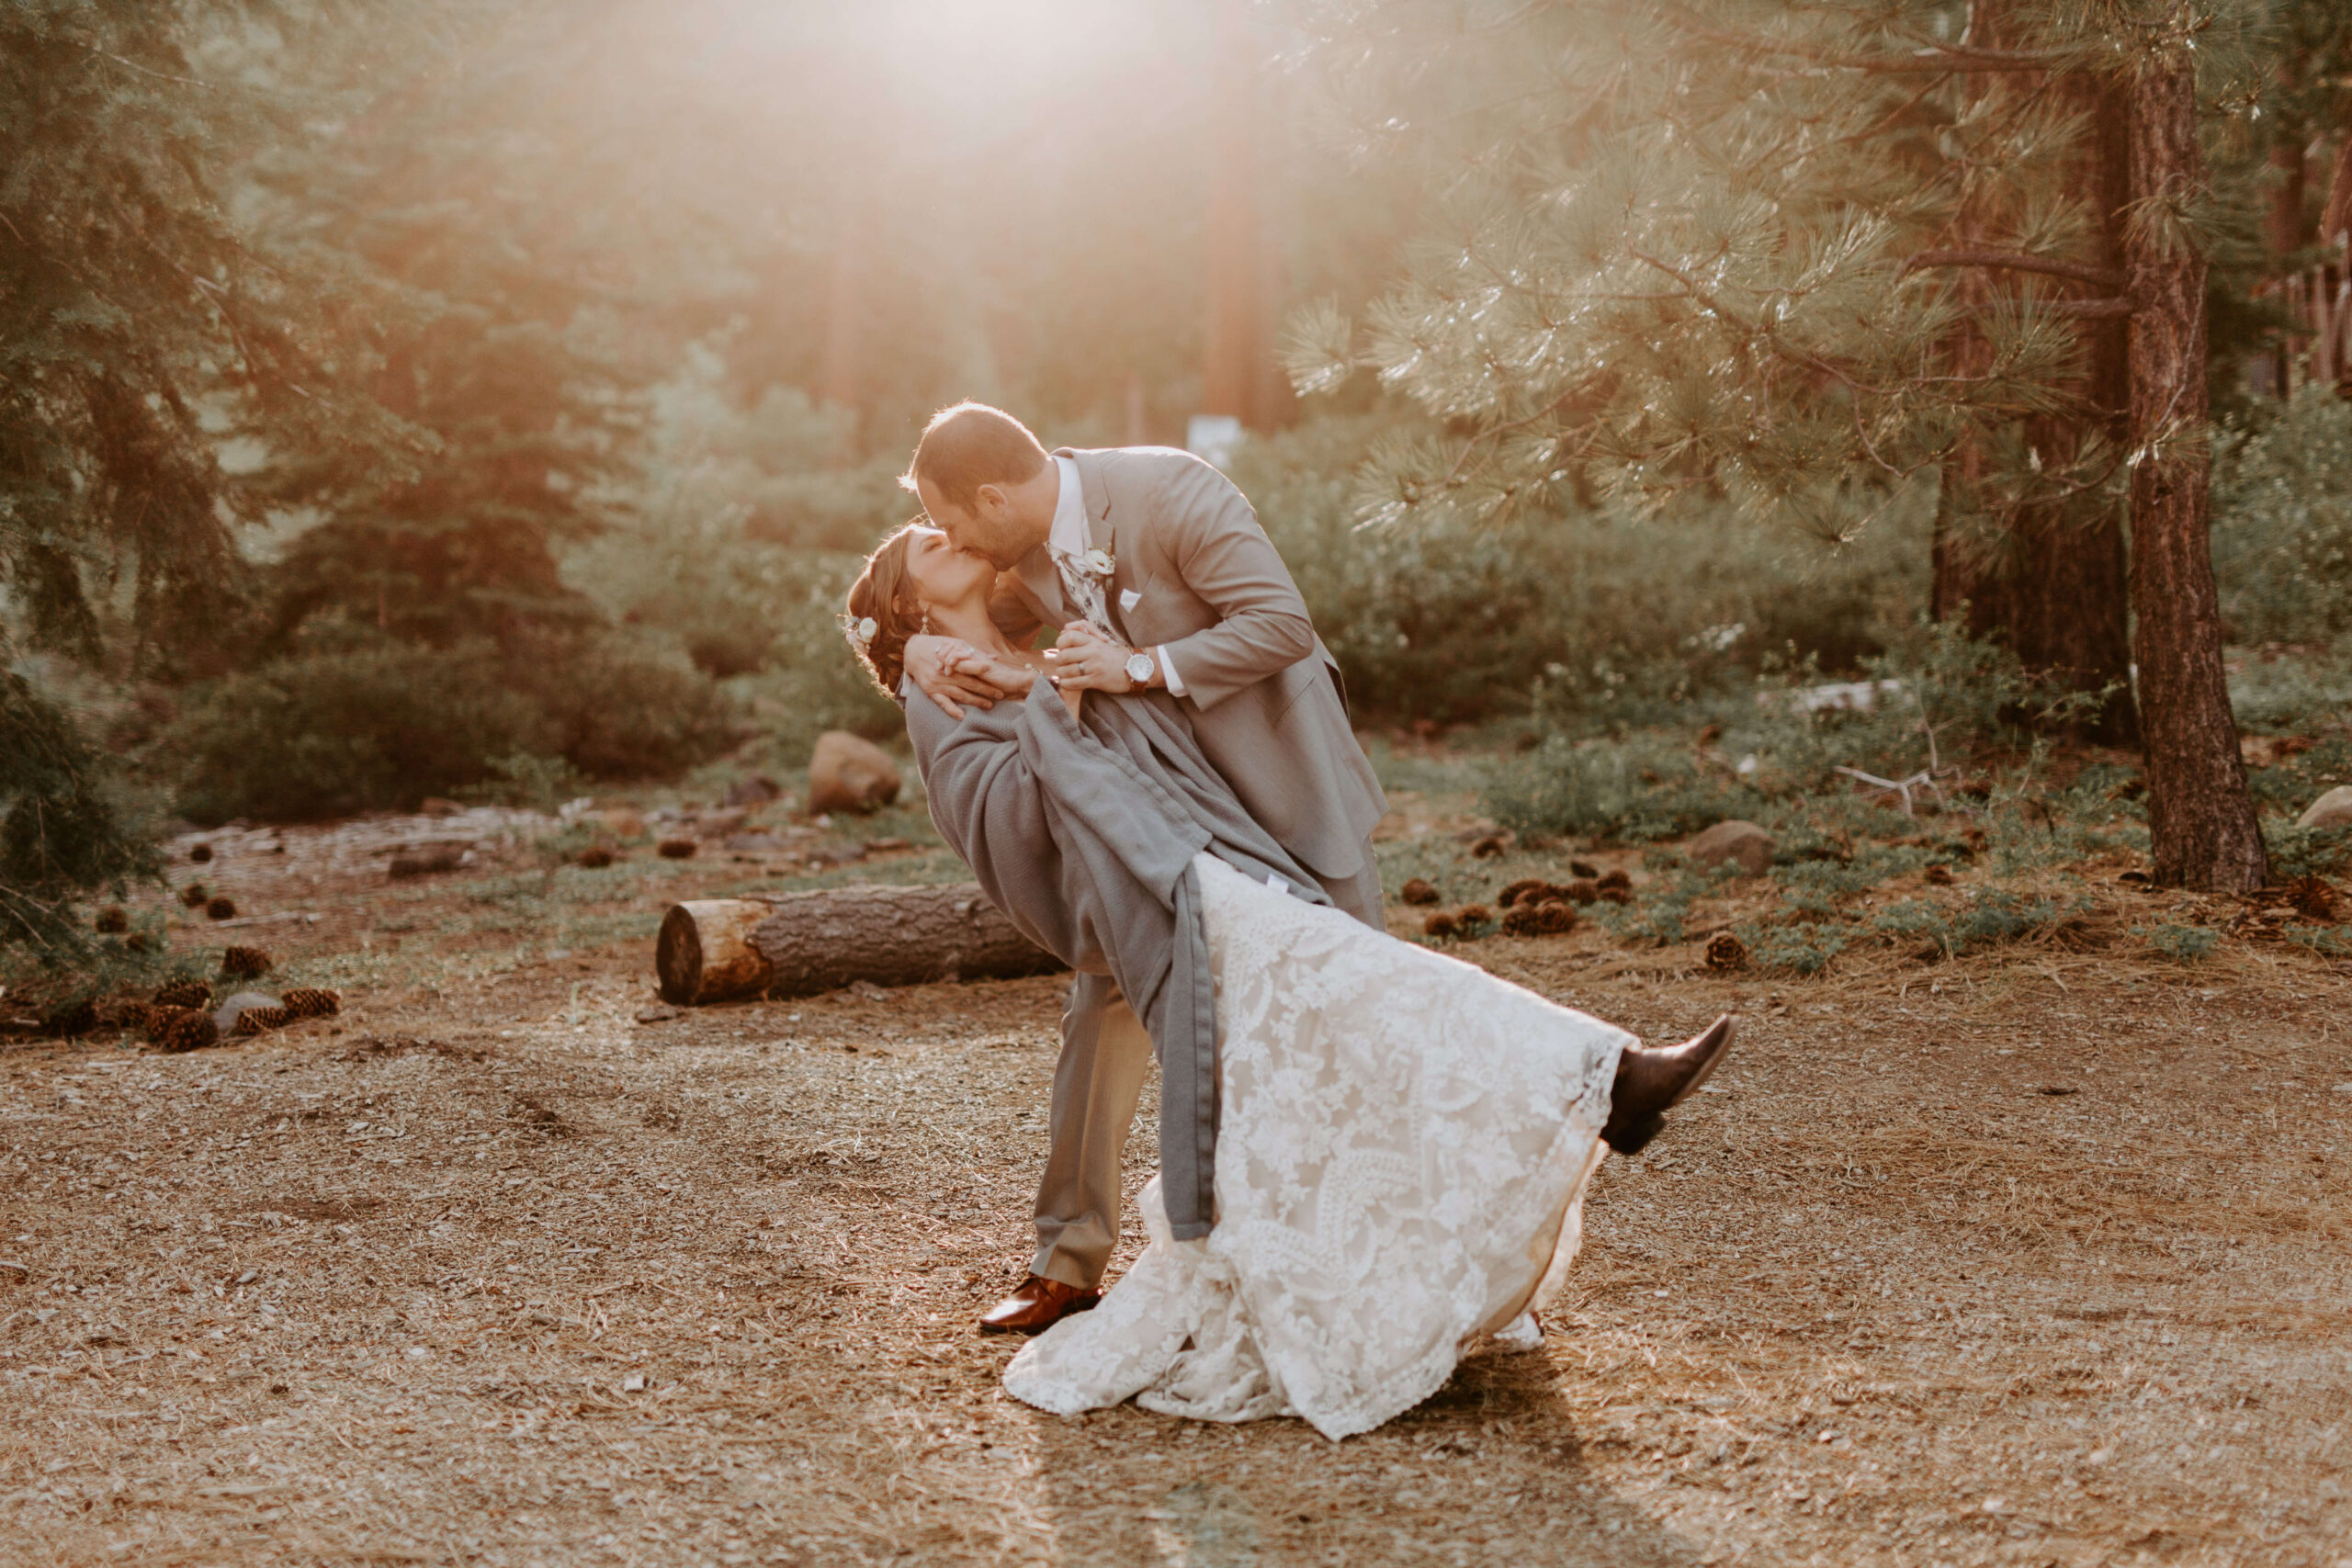 Romantic wedding in the forest